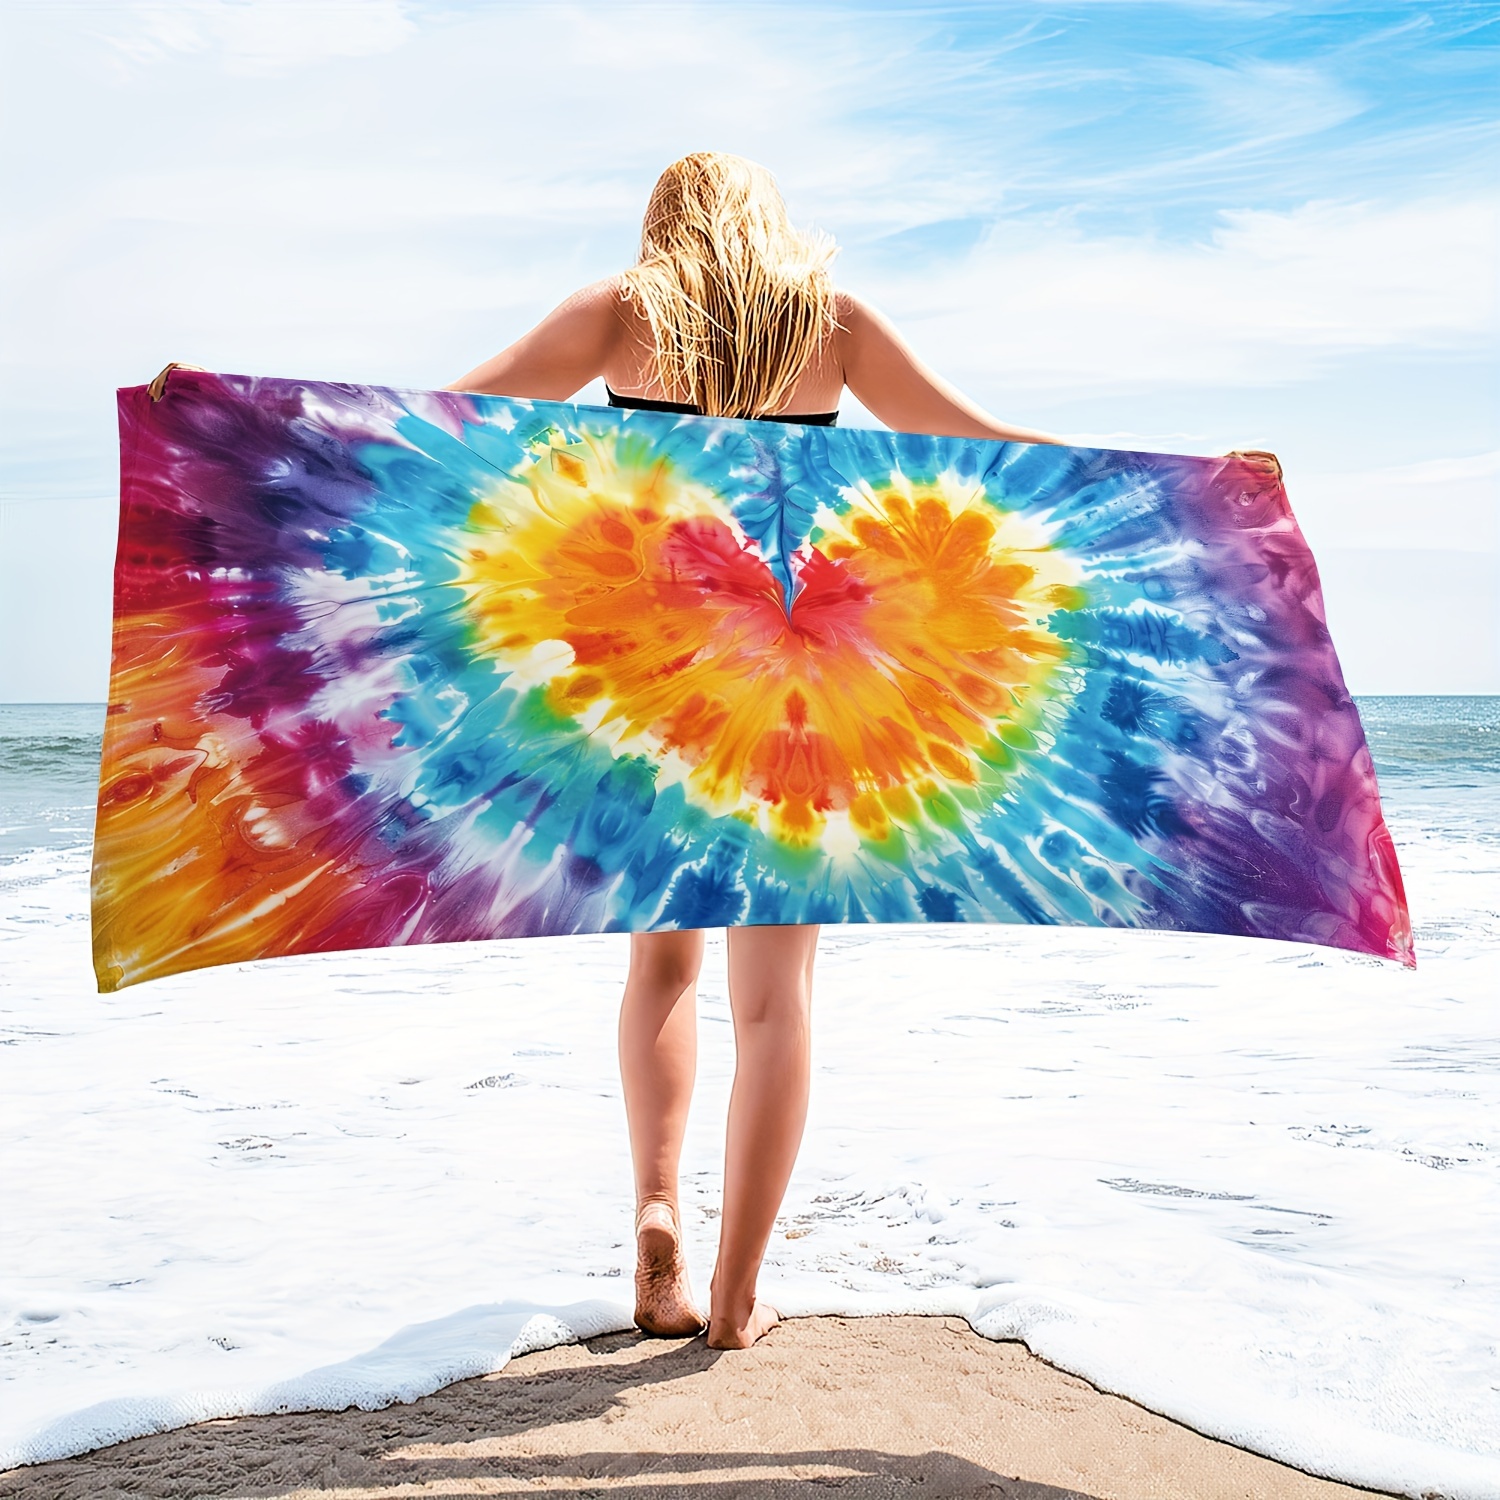 

1pc Abstract Tie-dyed Microfiber Extra Large Beach Towel, Heart-shaped Beach Towel, Durable And Quick-drying Sunscreen Washable And Absorbent Bath Towel